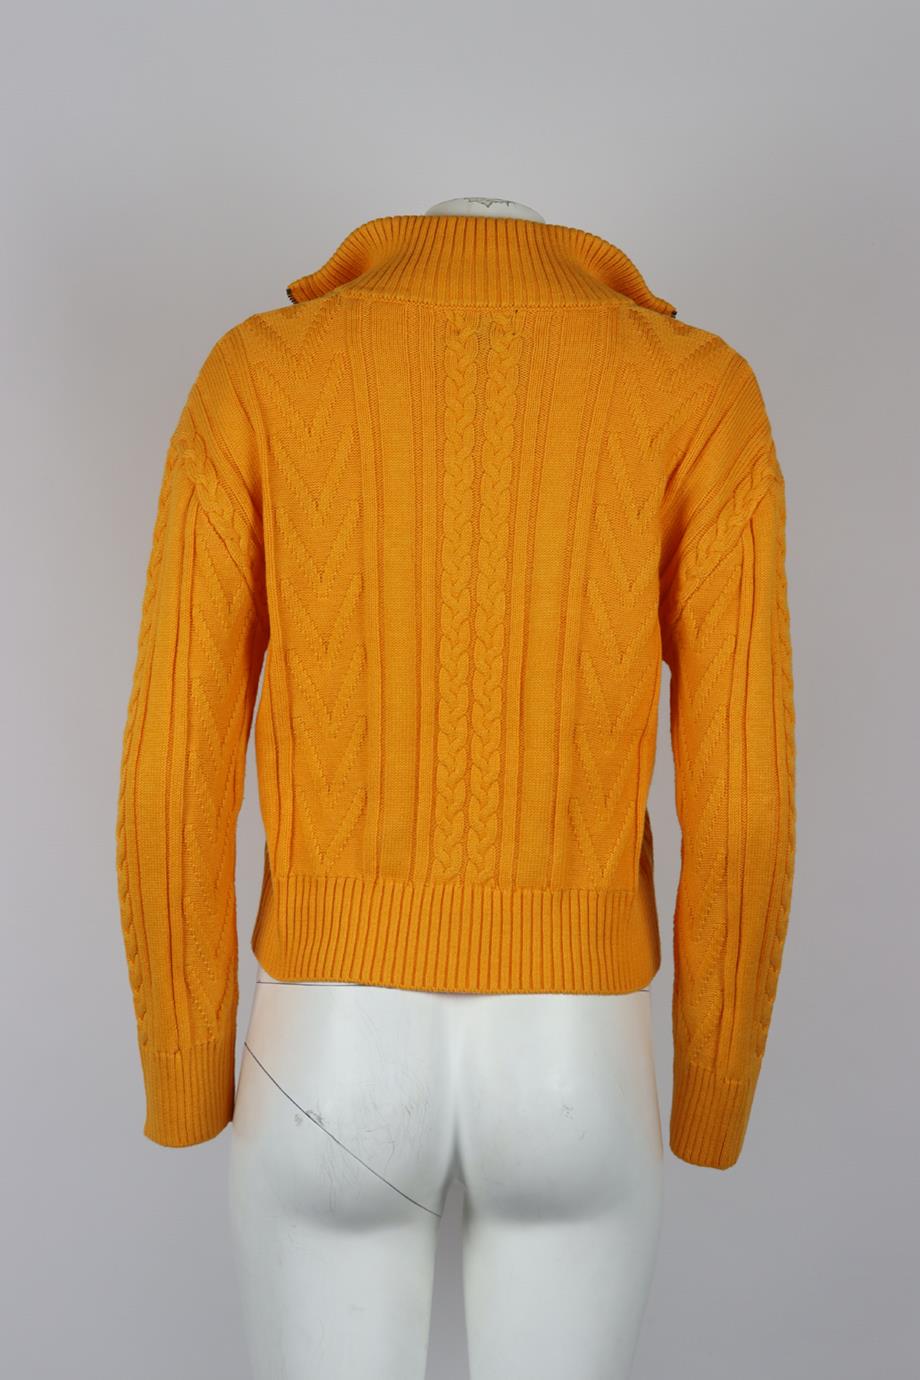 MONROW CABLE KNIT COTTON BLEND TURTLENECK SWEATER SMALL